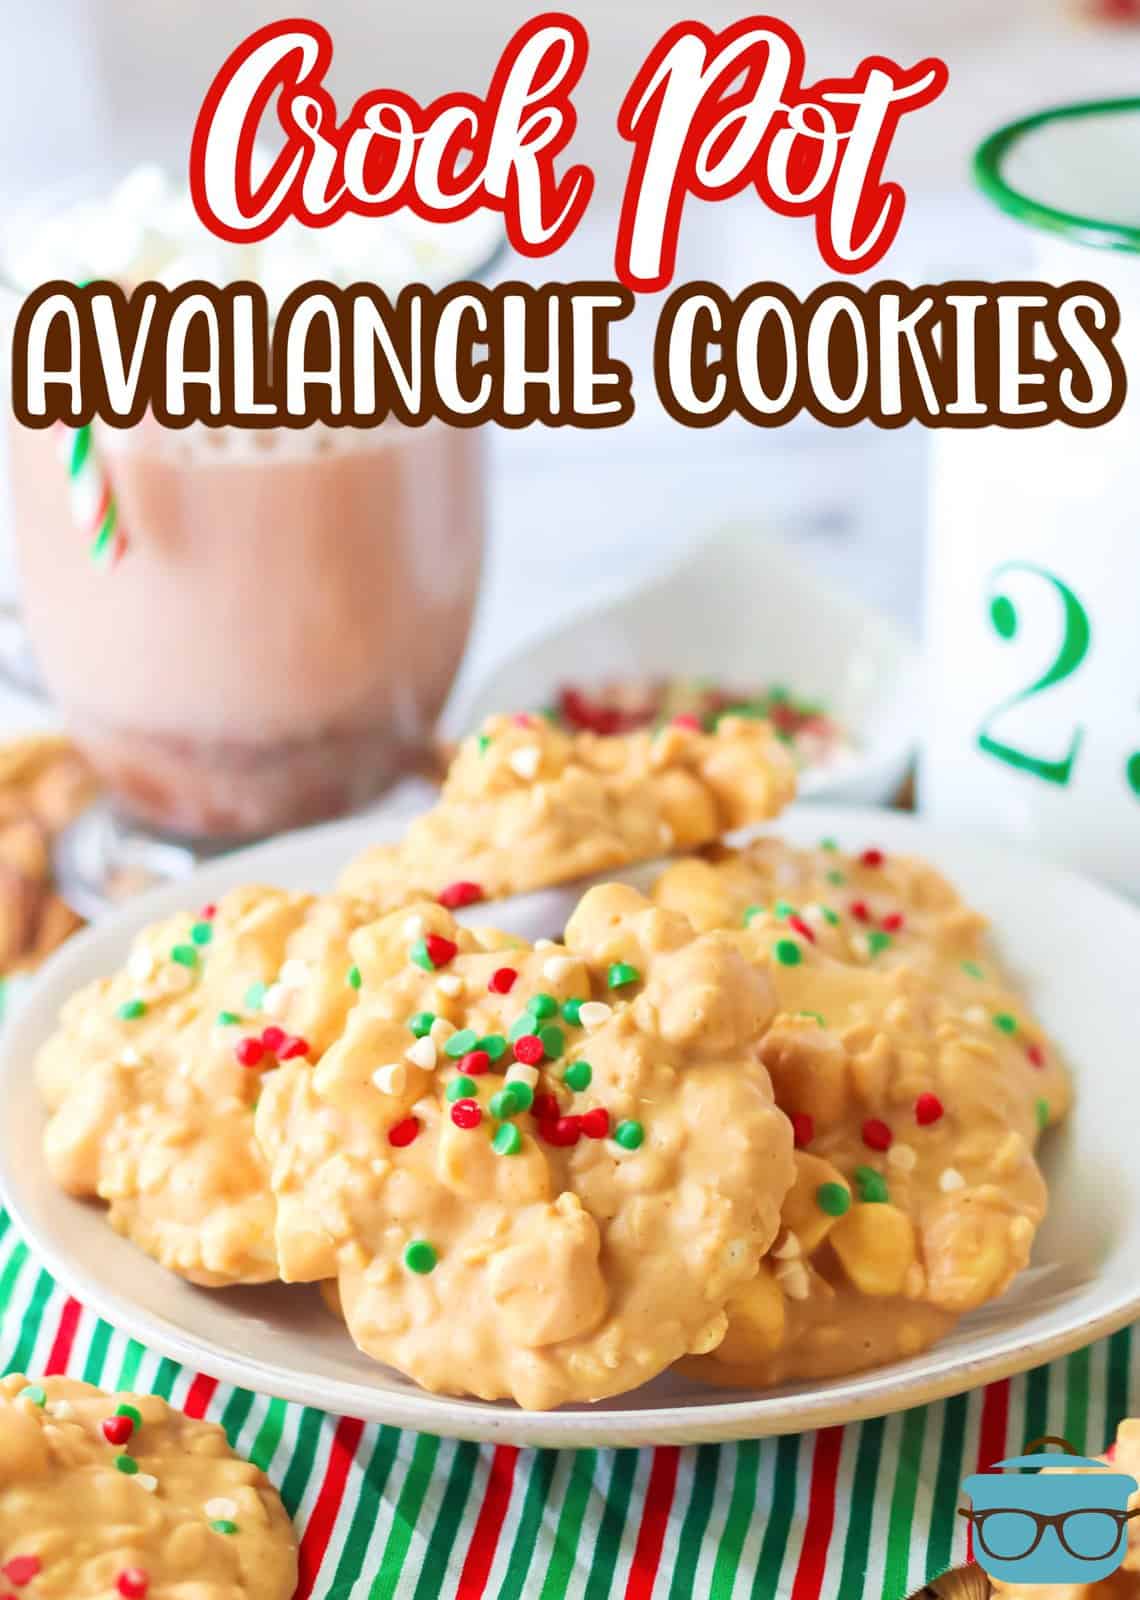 Pinterest image of Crock Pot Avalanche Cookies on white plate with hot chocolate in background.